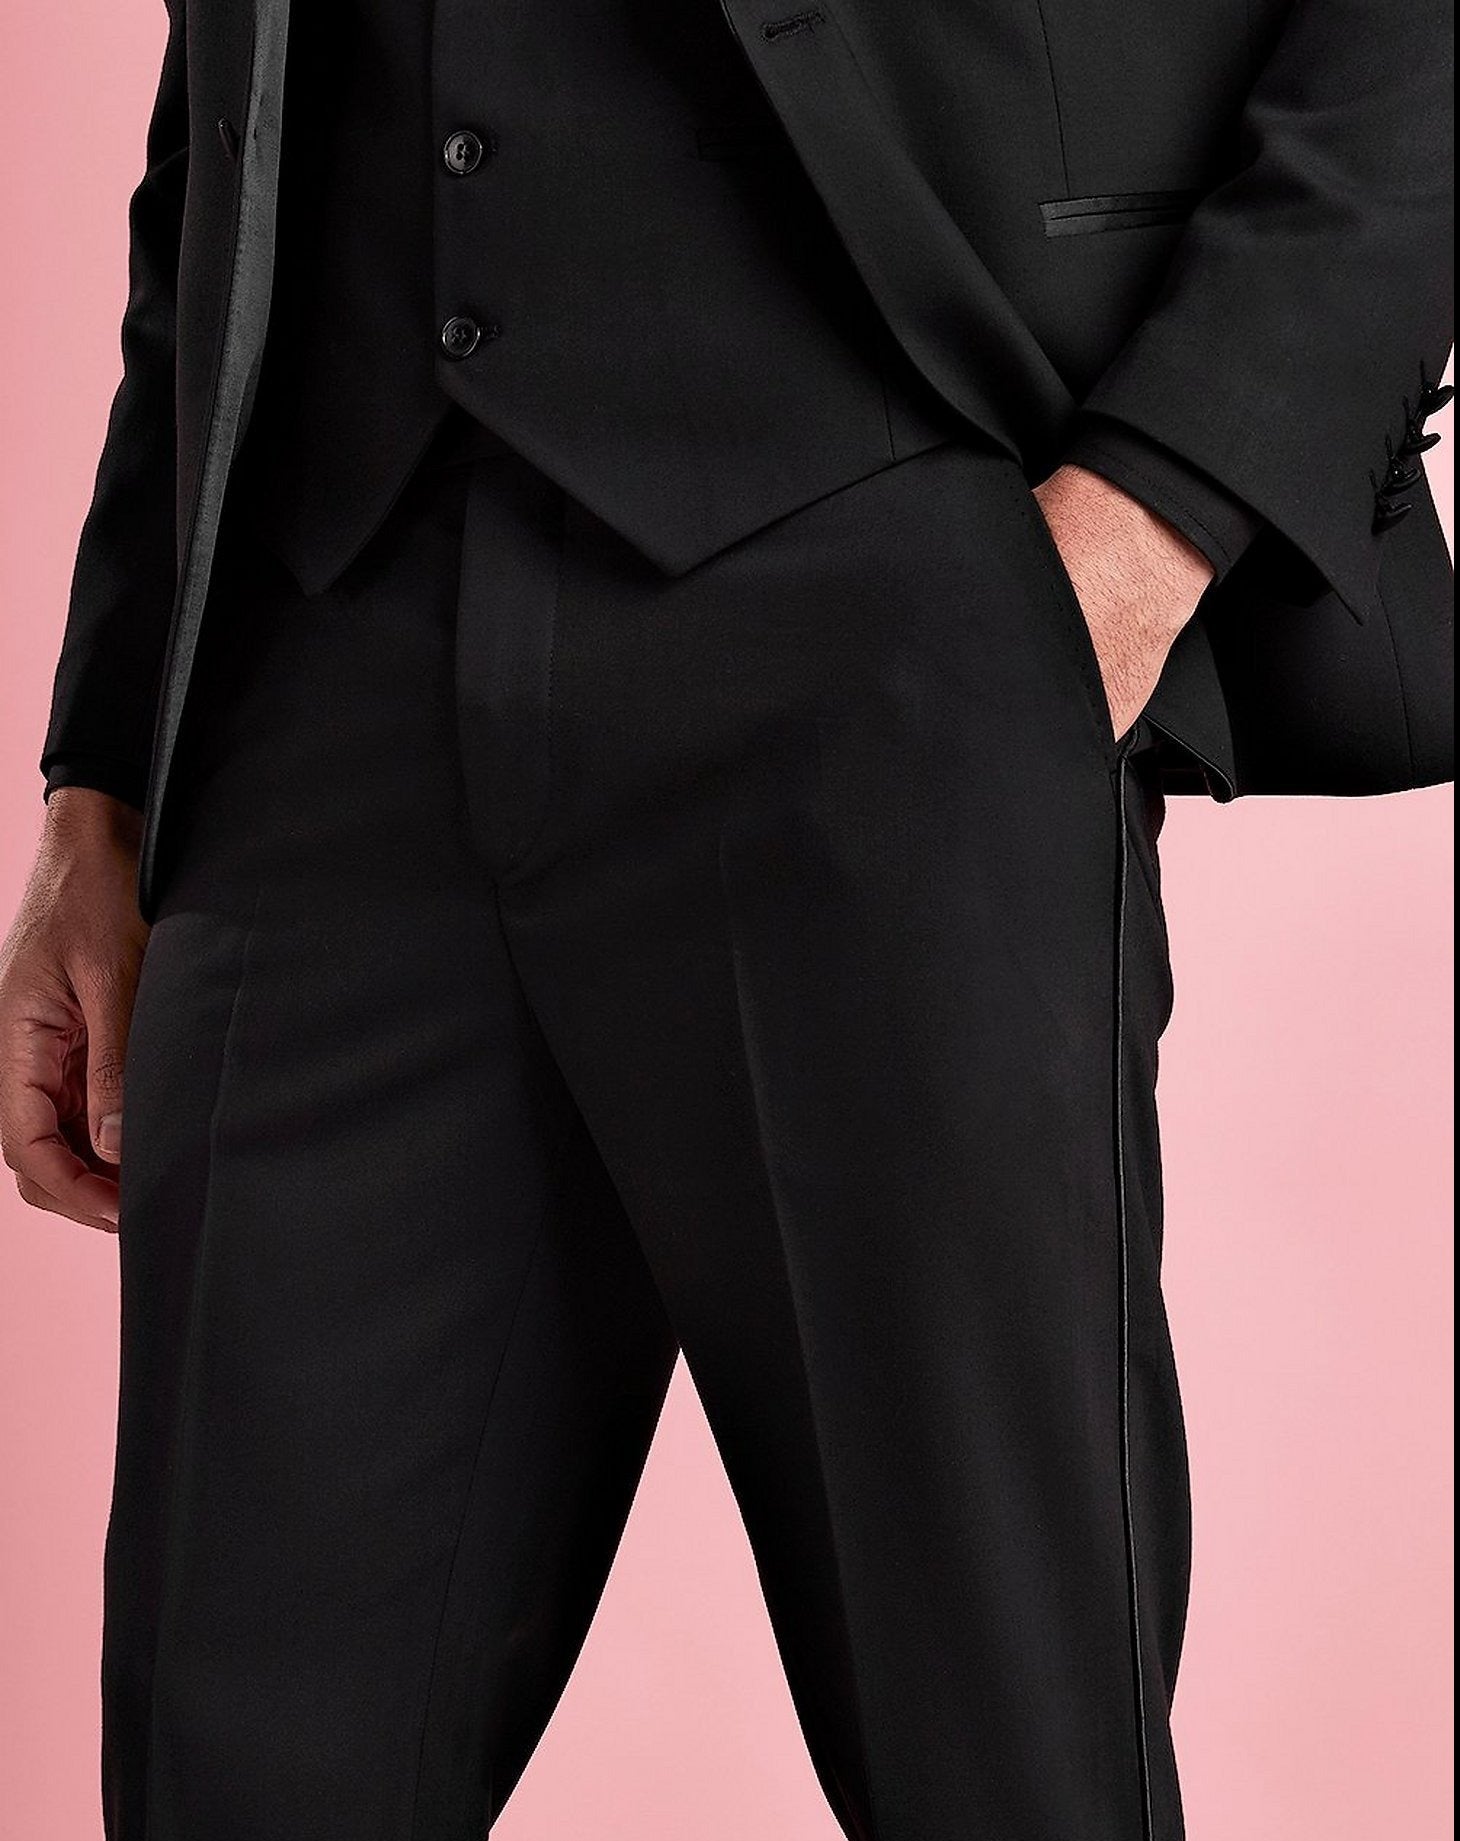 Kin Wool Blend Slim Fit Suit Trousers, Charcoal at John Lewis & Partners